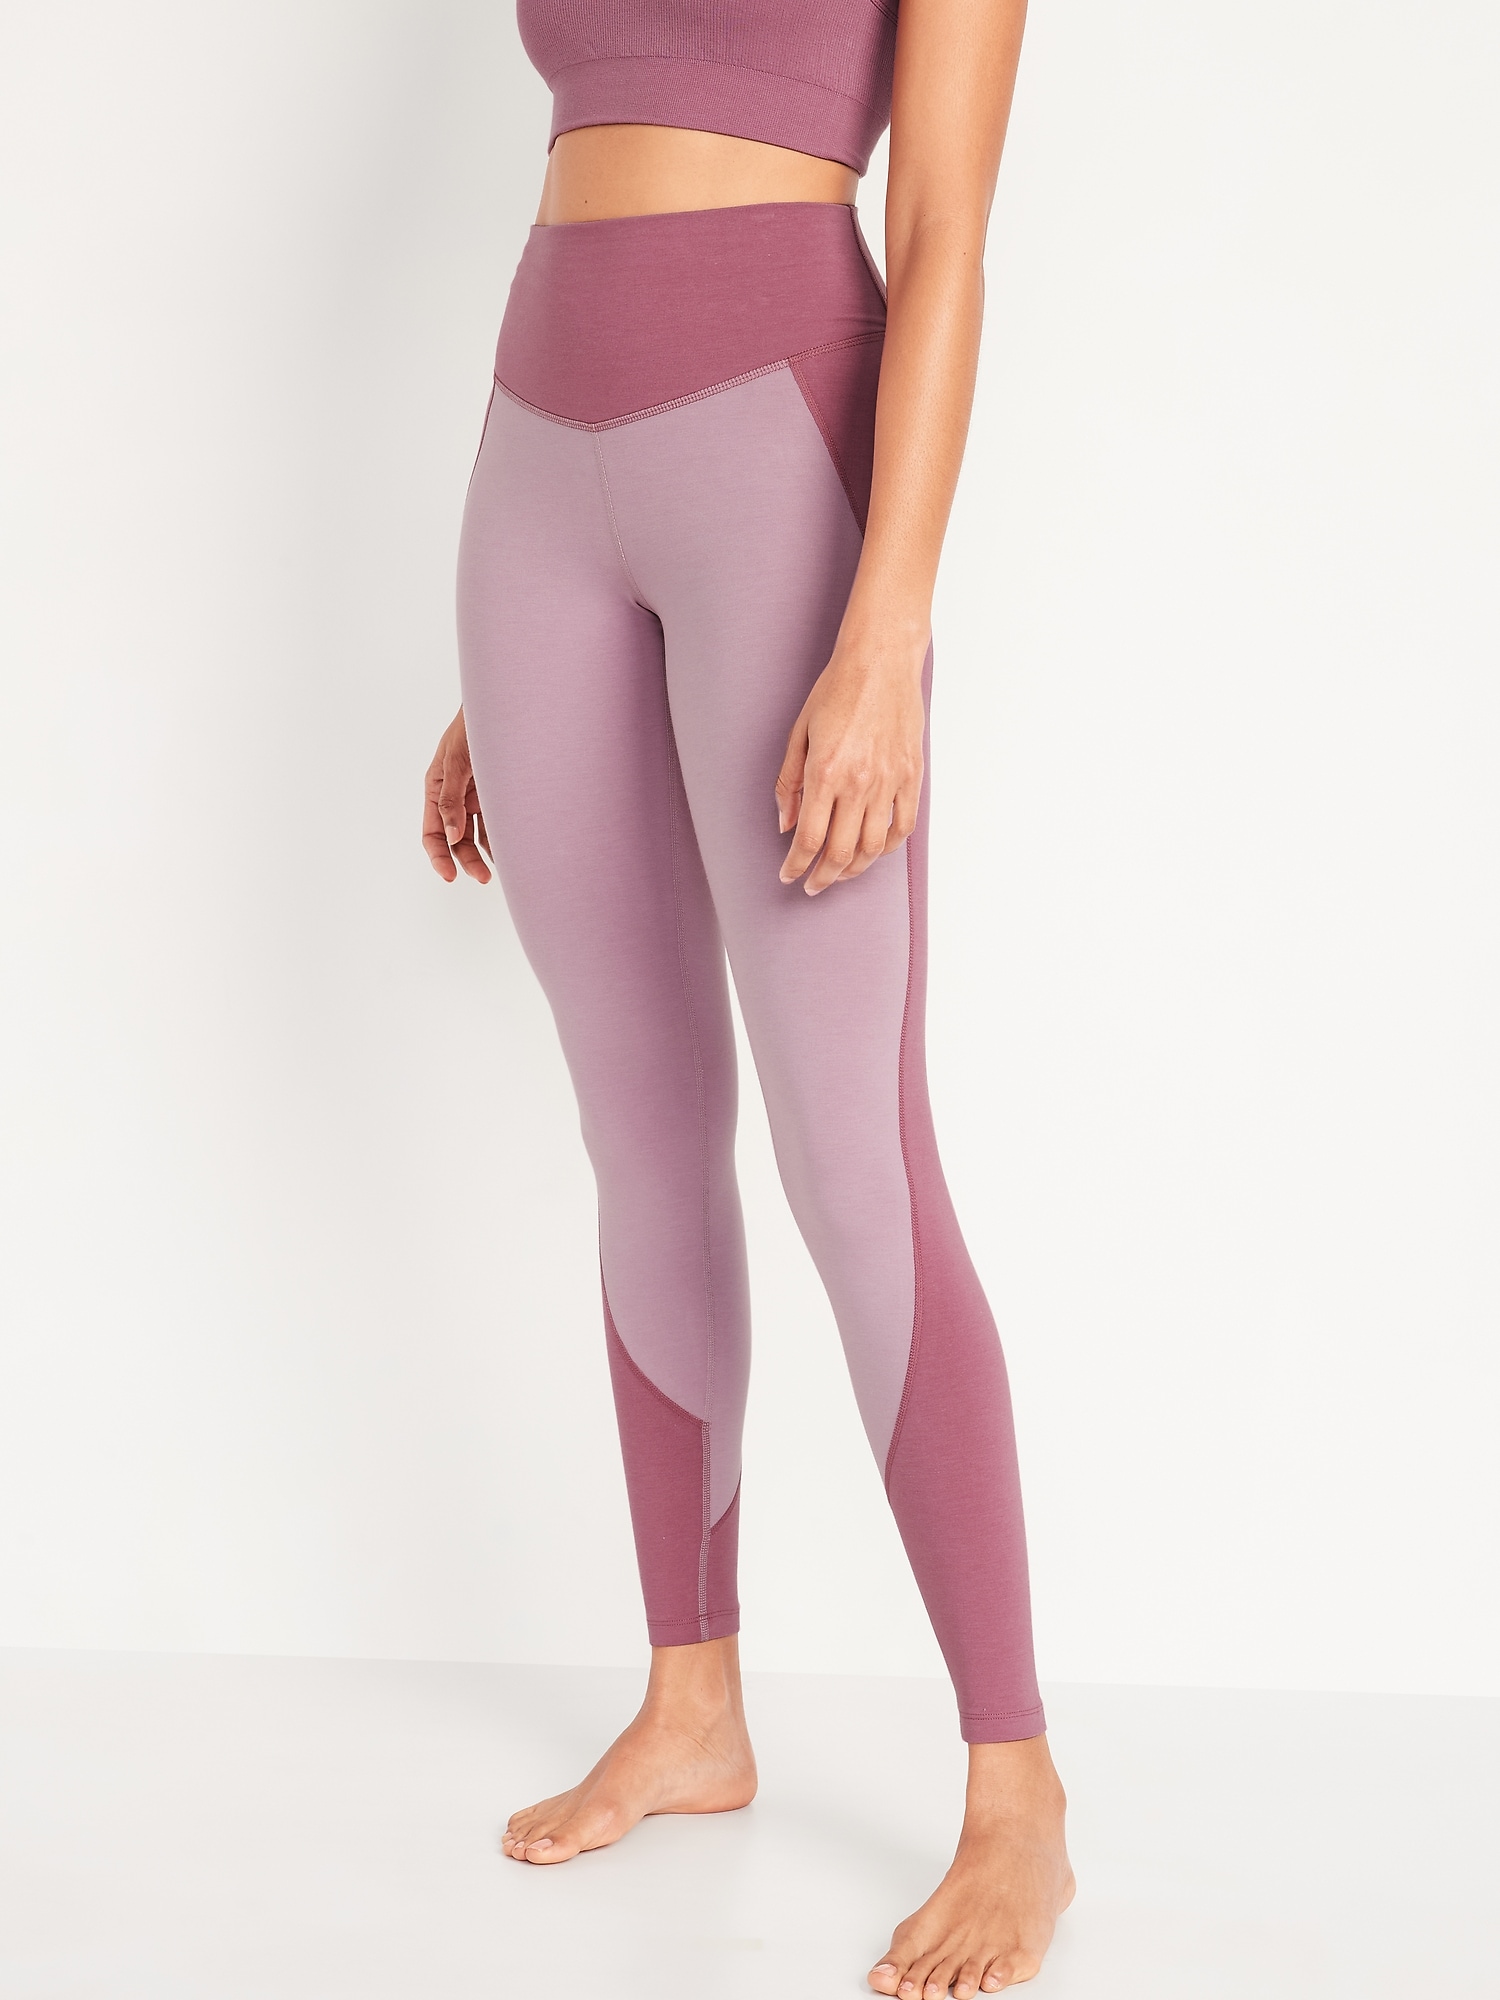 Extra High-Waisted PowerChill Two-Tone Compression Leggings